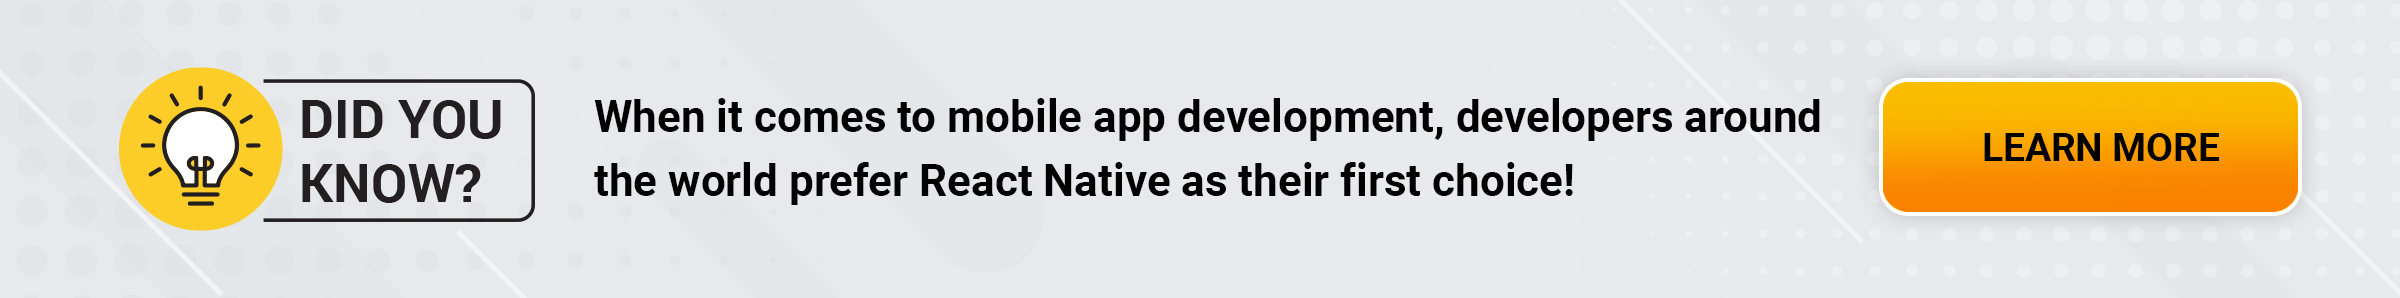 When it comes to mobile app development, developers around the world prefer React Native as their first choice!